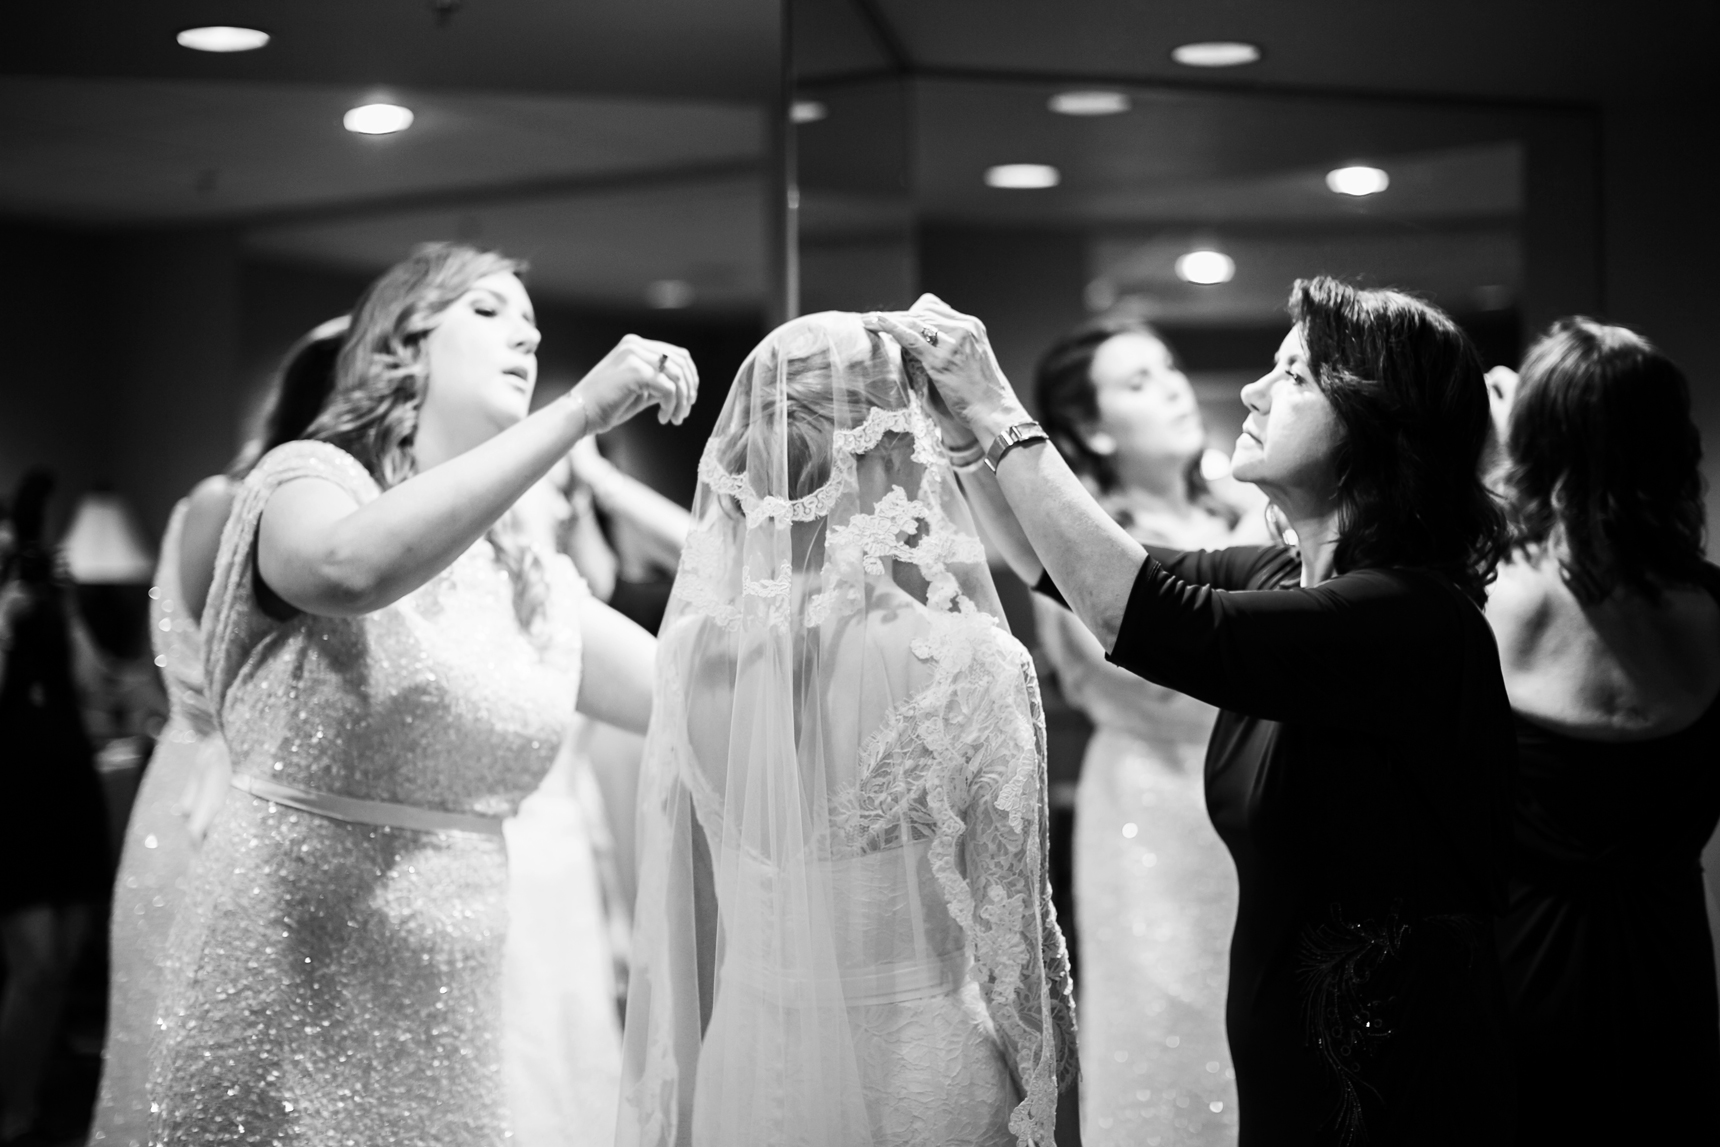 Mom and sister putting on bride's veil